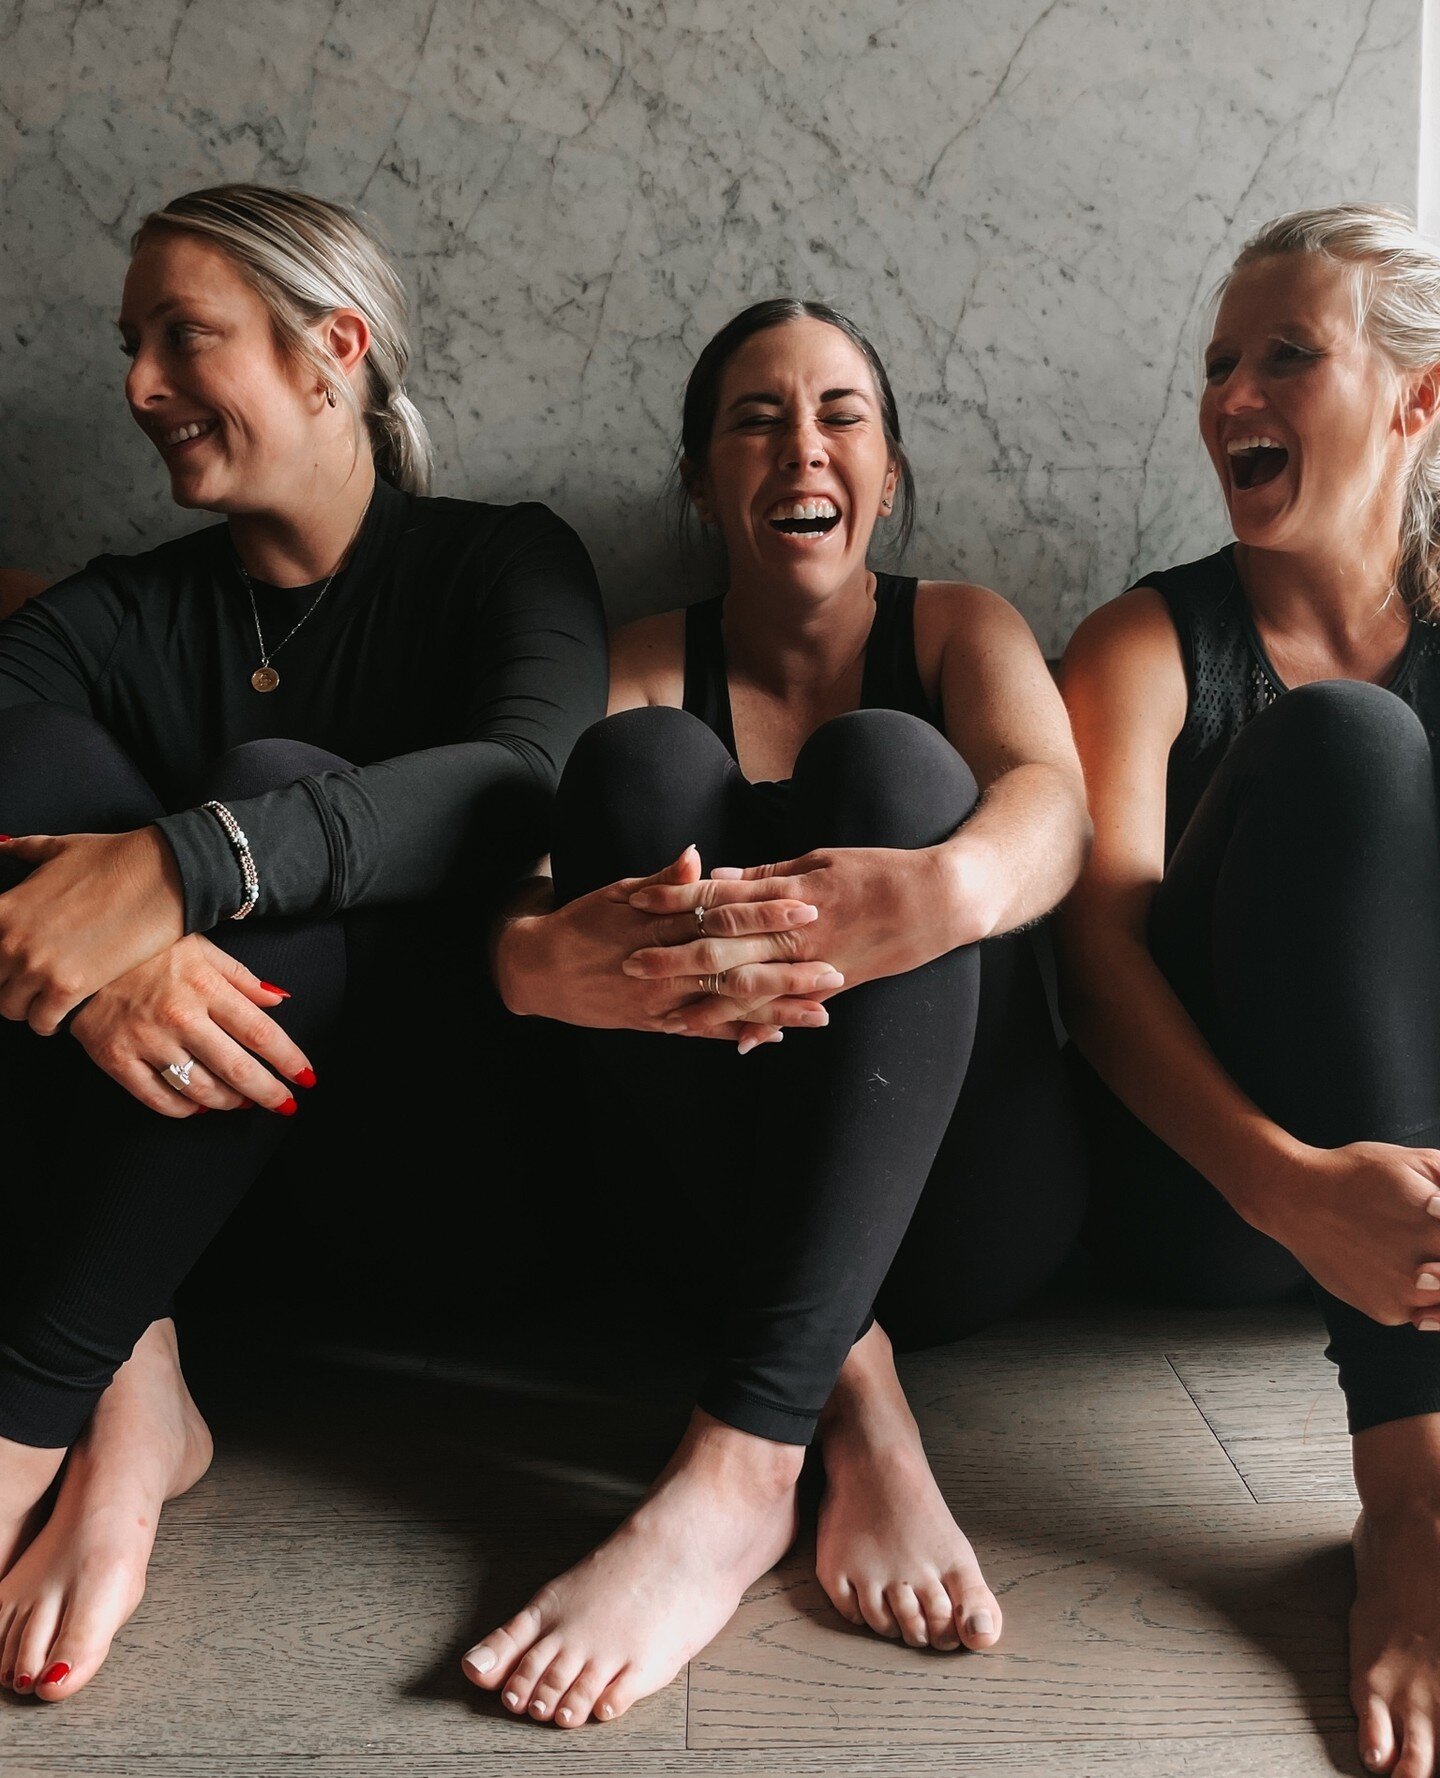 Would you love being a teacher at Karma Yoga?!⁠
⁠
Well, we would LOVE to have you! 🤩🙏🏽⁠
⁠
Our Austin, Texas studio is opening early 2023 and we're looking for new Hot HIIT Flow teachers to join our team.⁠
⁠
THIS WEEKEND we'll be hosting a HHF Teac